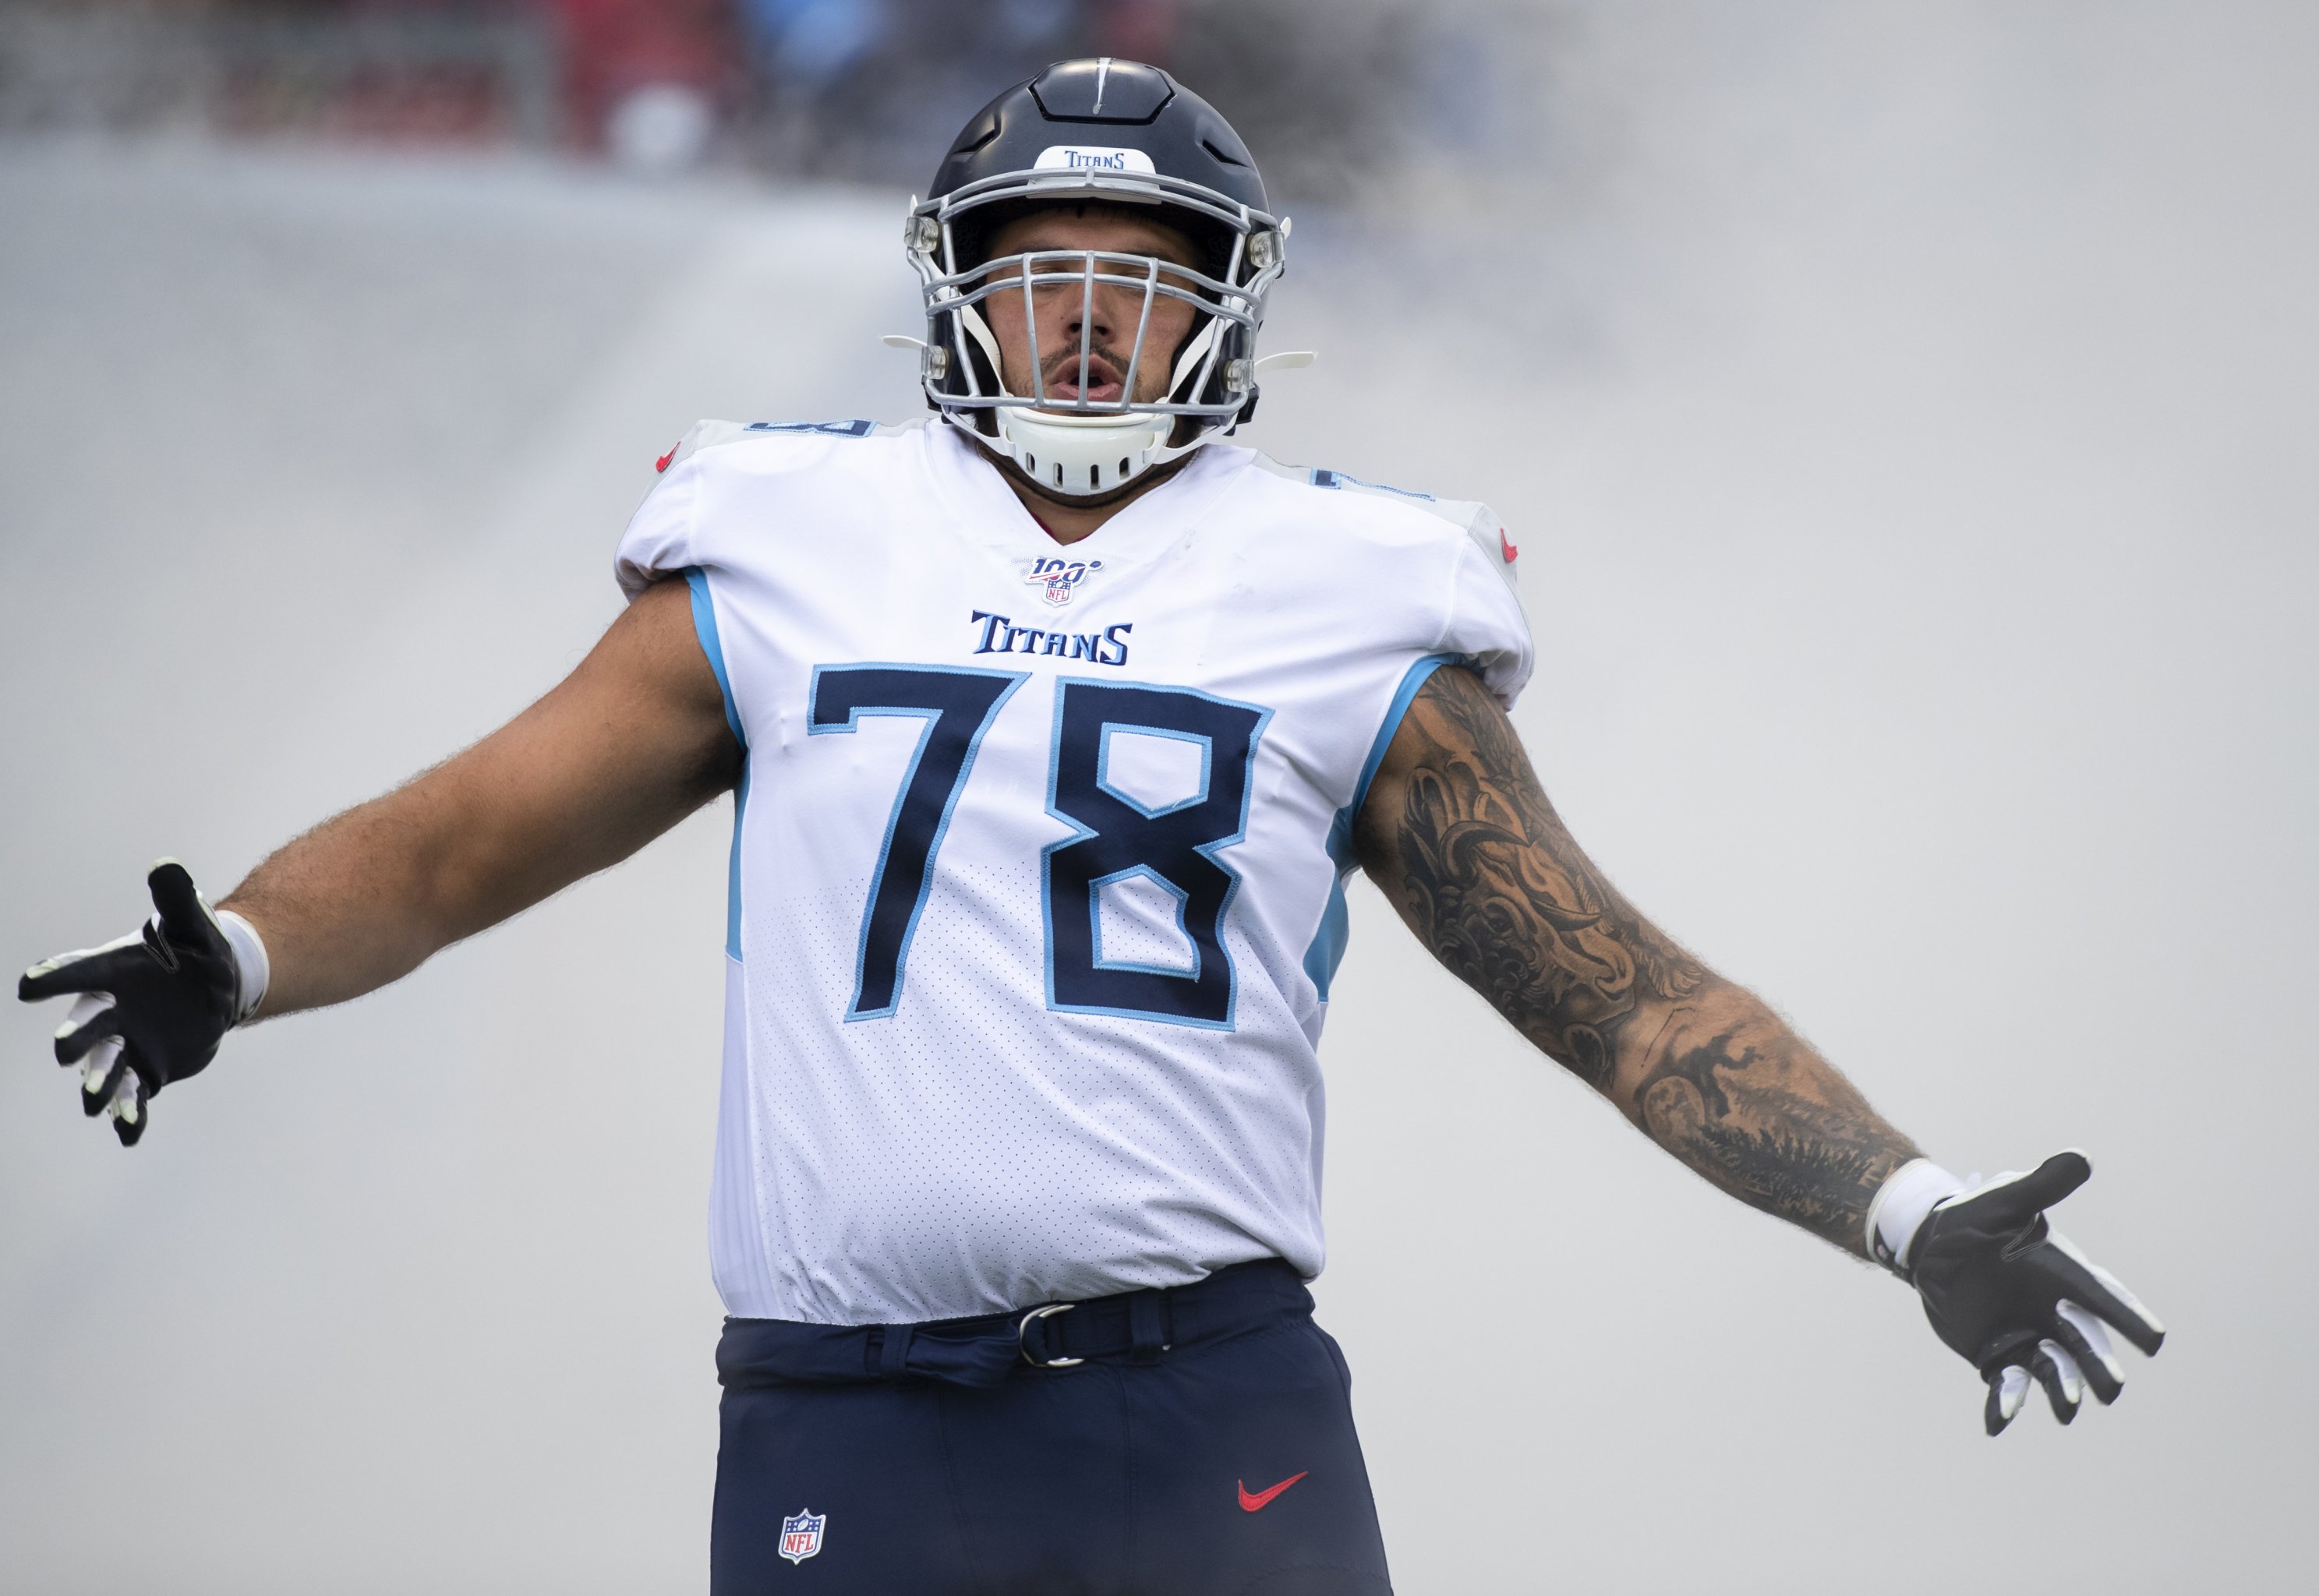 WOW. For the first time since 2008, the Tennessee Titans are AFC